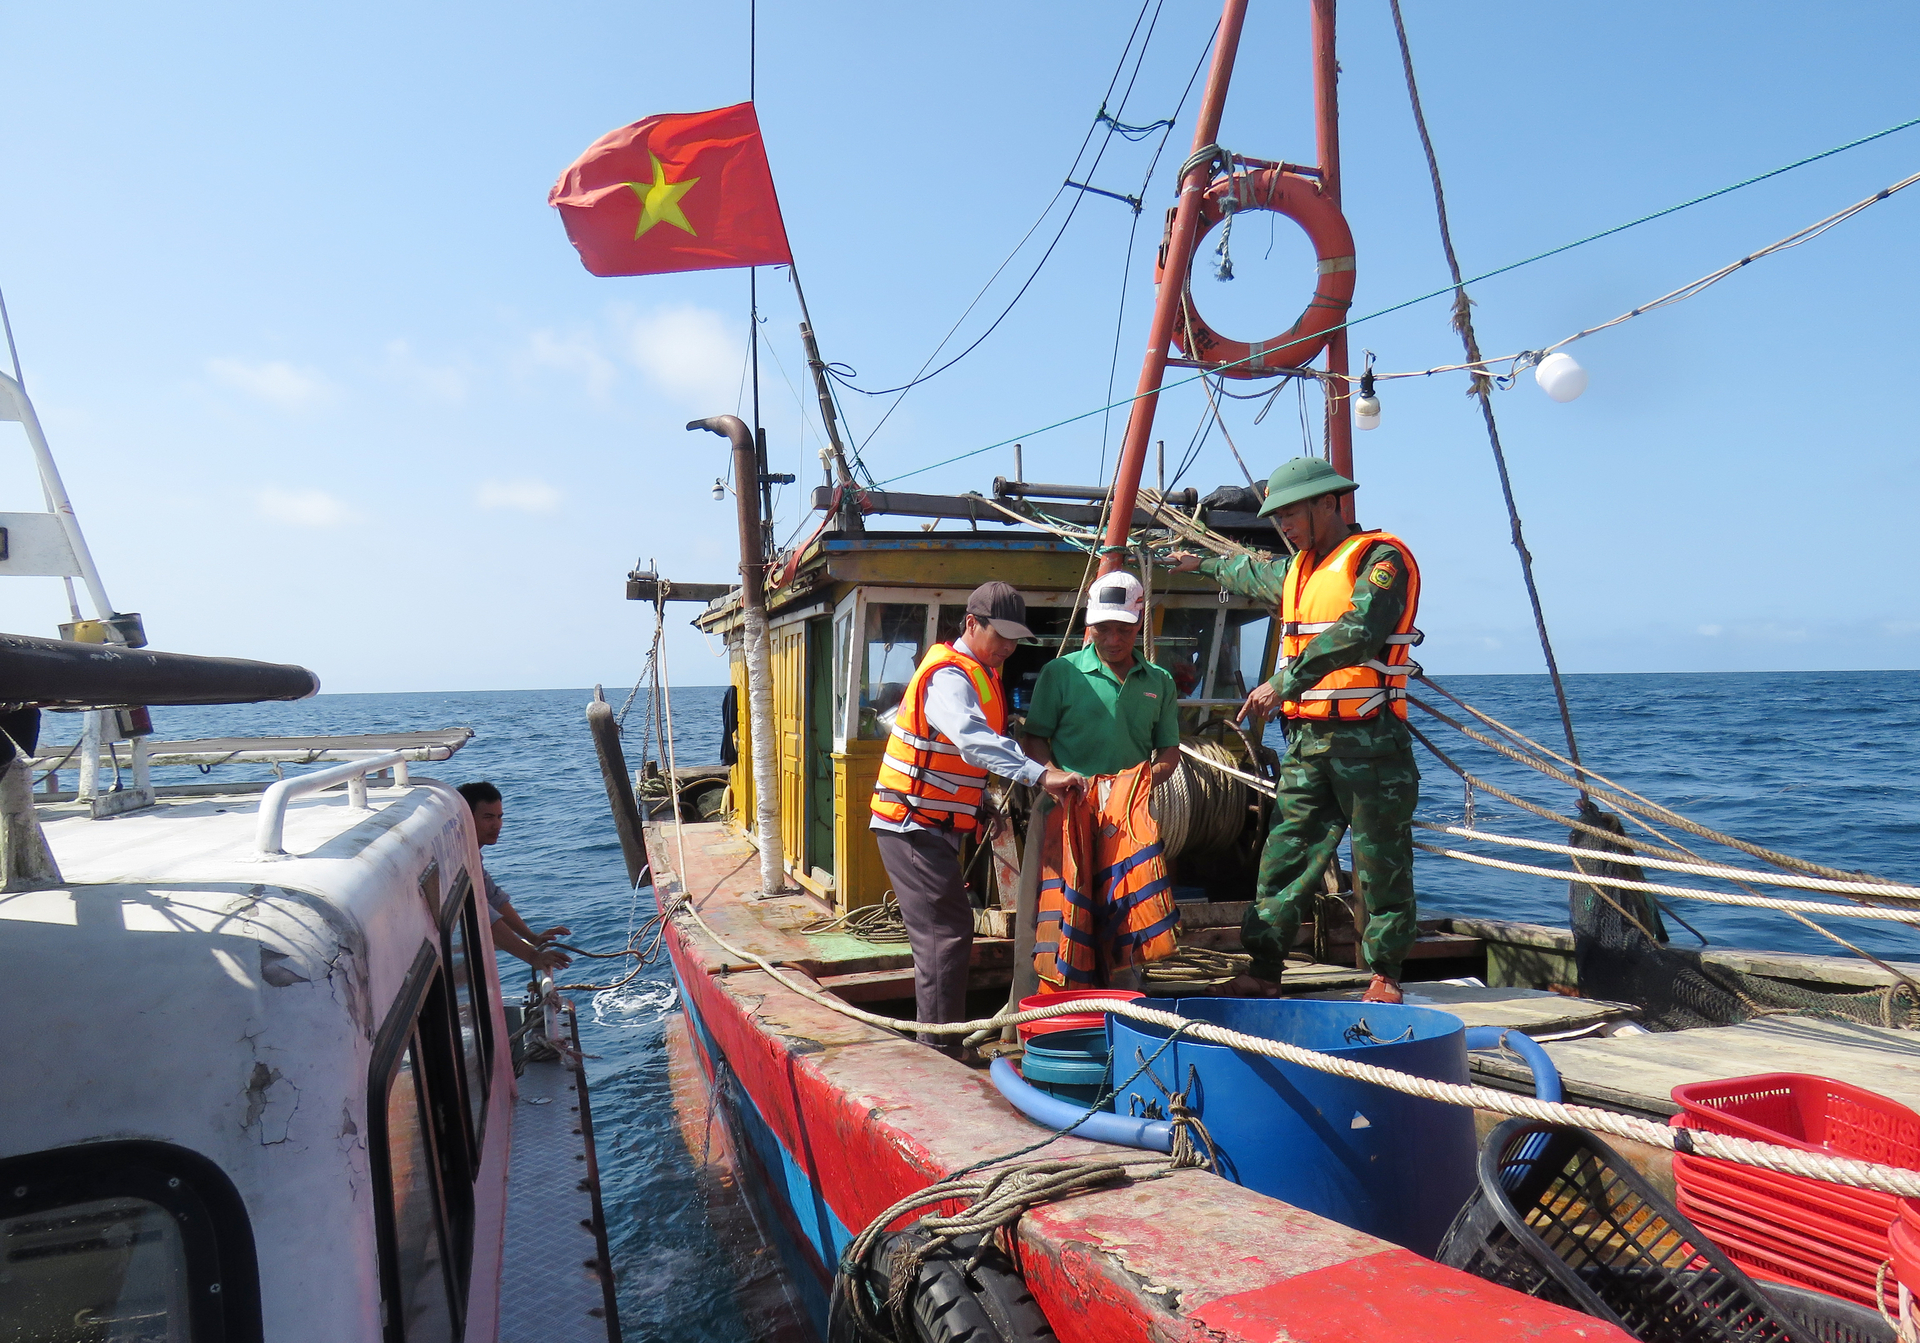 The maritime patrol force is inspecting the fishing vessel's administration. Photo: T. Phung.